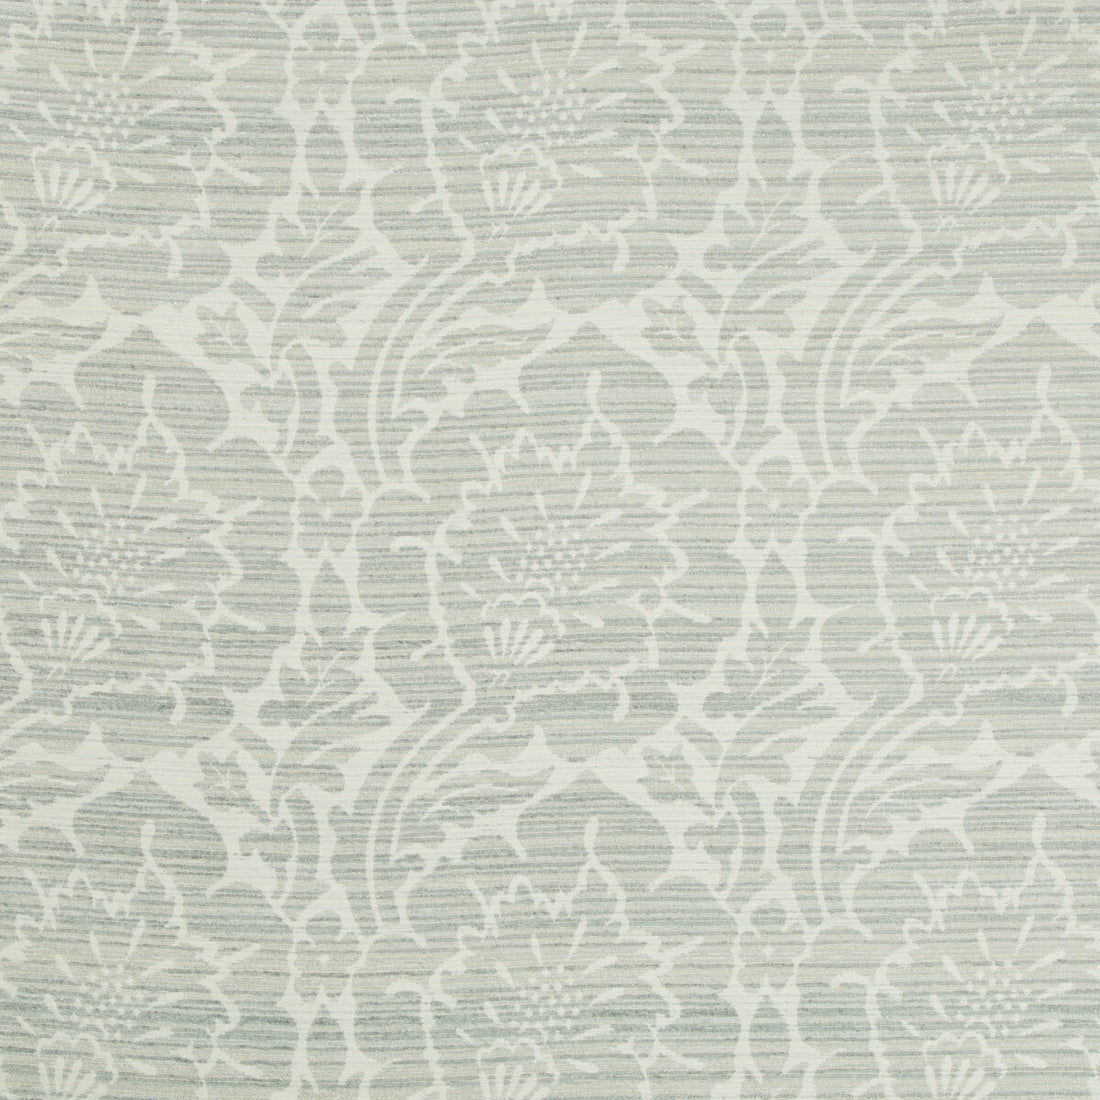 Kravet Design fabric in 35024-11 color - pattern 35024.11.0 - by Kravet Design in the Performance Crypton Home collection